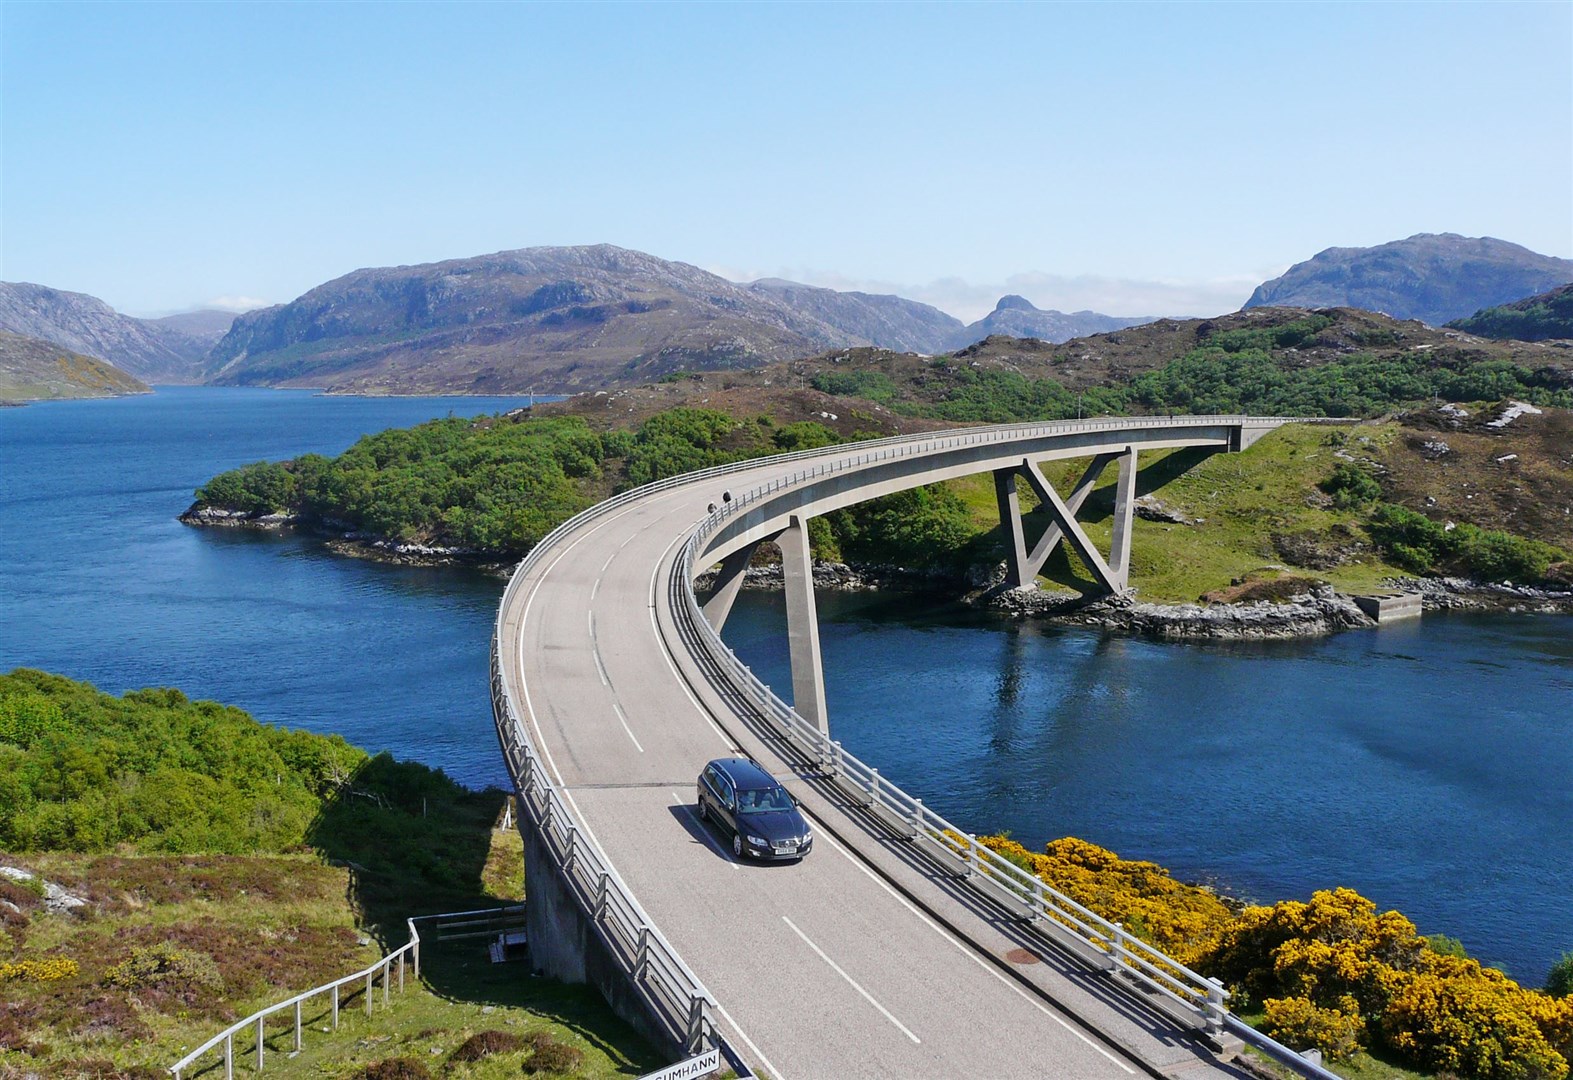 Majority want to continue with NC500 visit